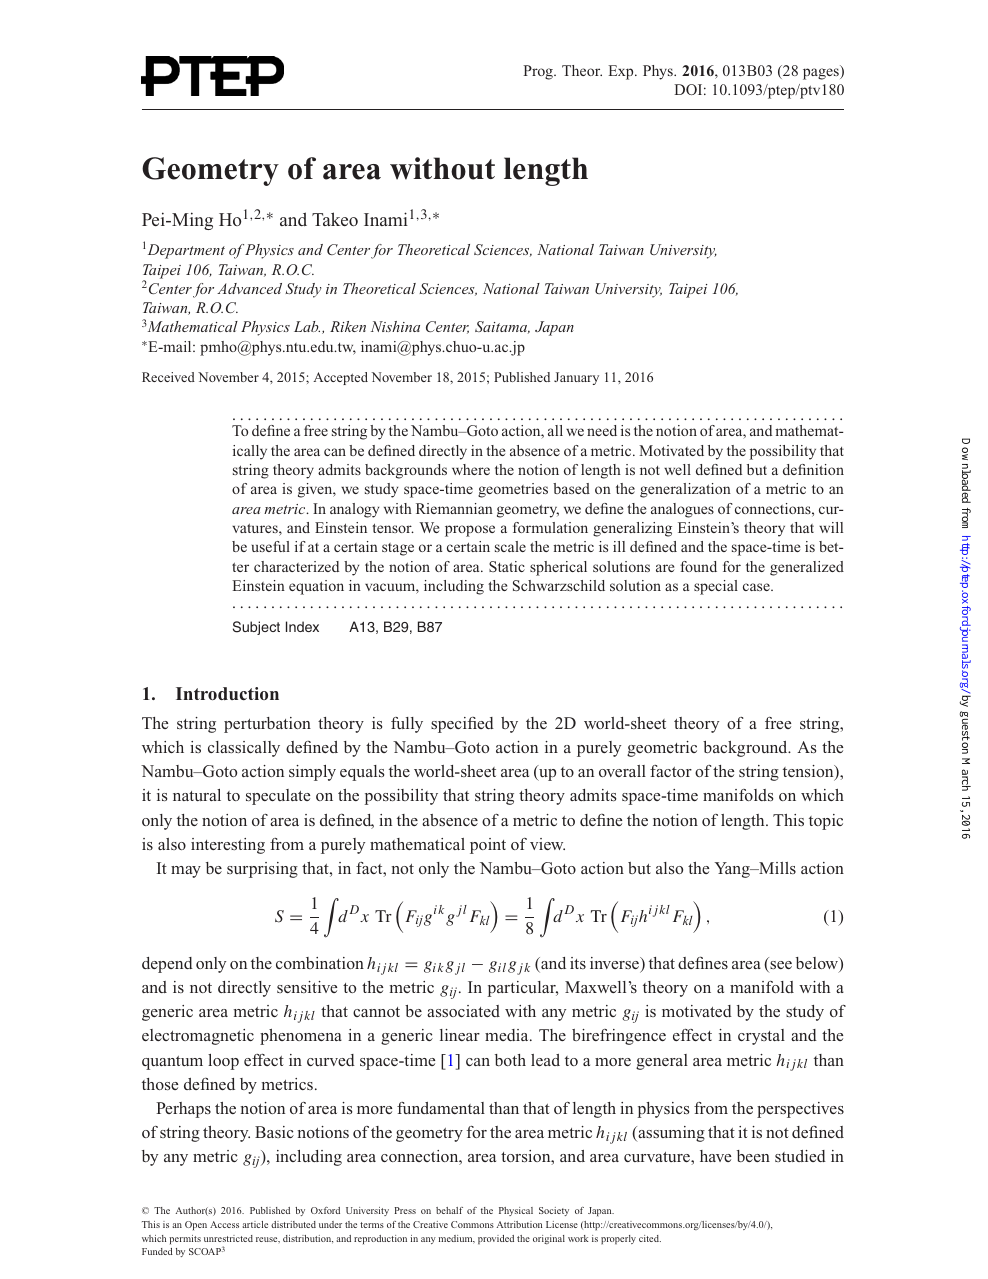 Geometry Of Area Without Length Topic Of Research Paper In Physical Sciences Download Scholarly Article Pdf And Read For Free On Cyberleninka Open Science Hub